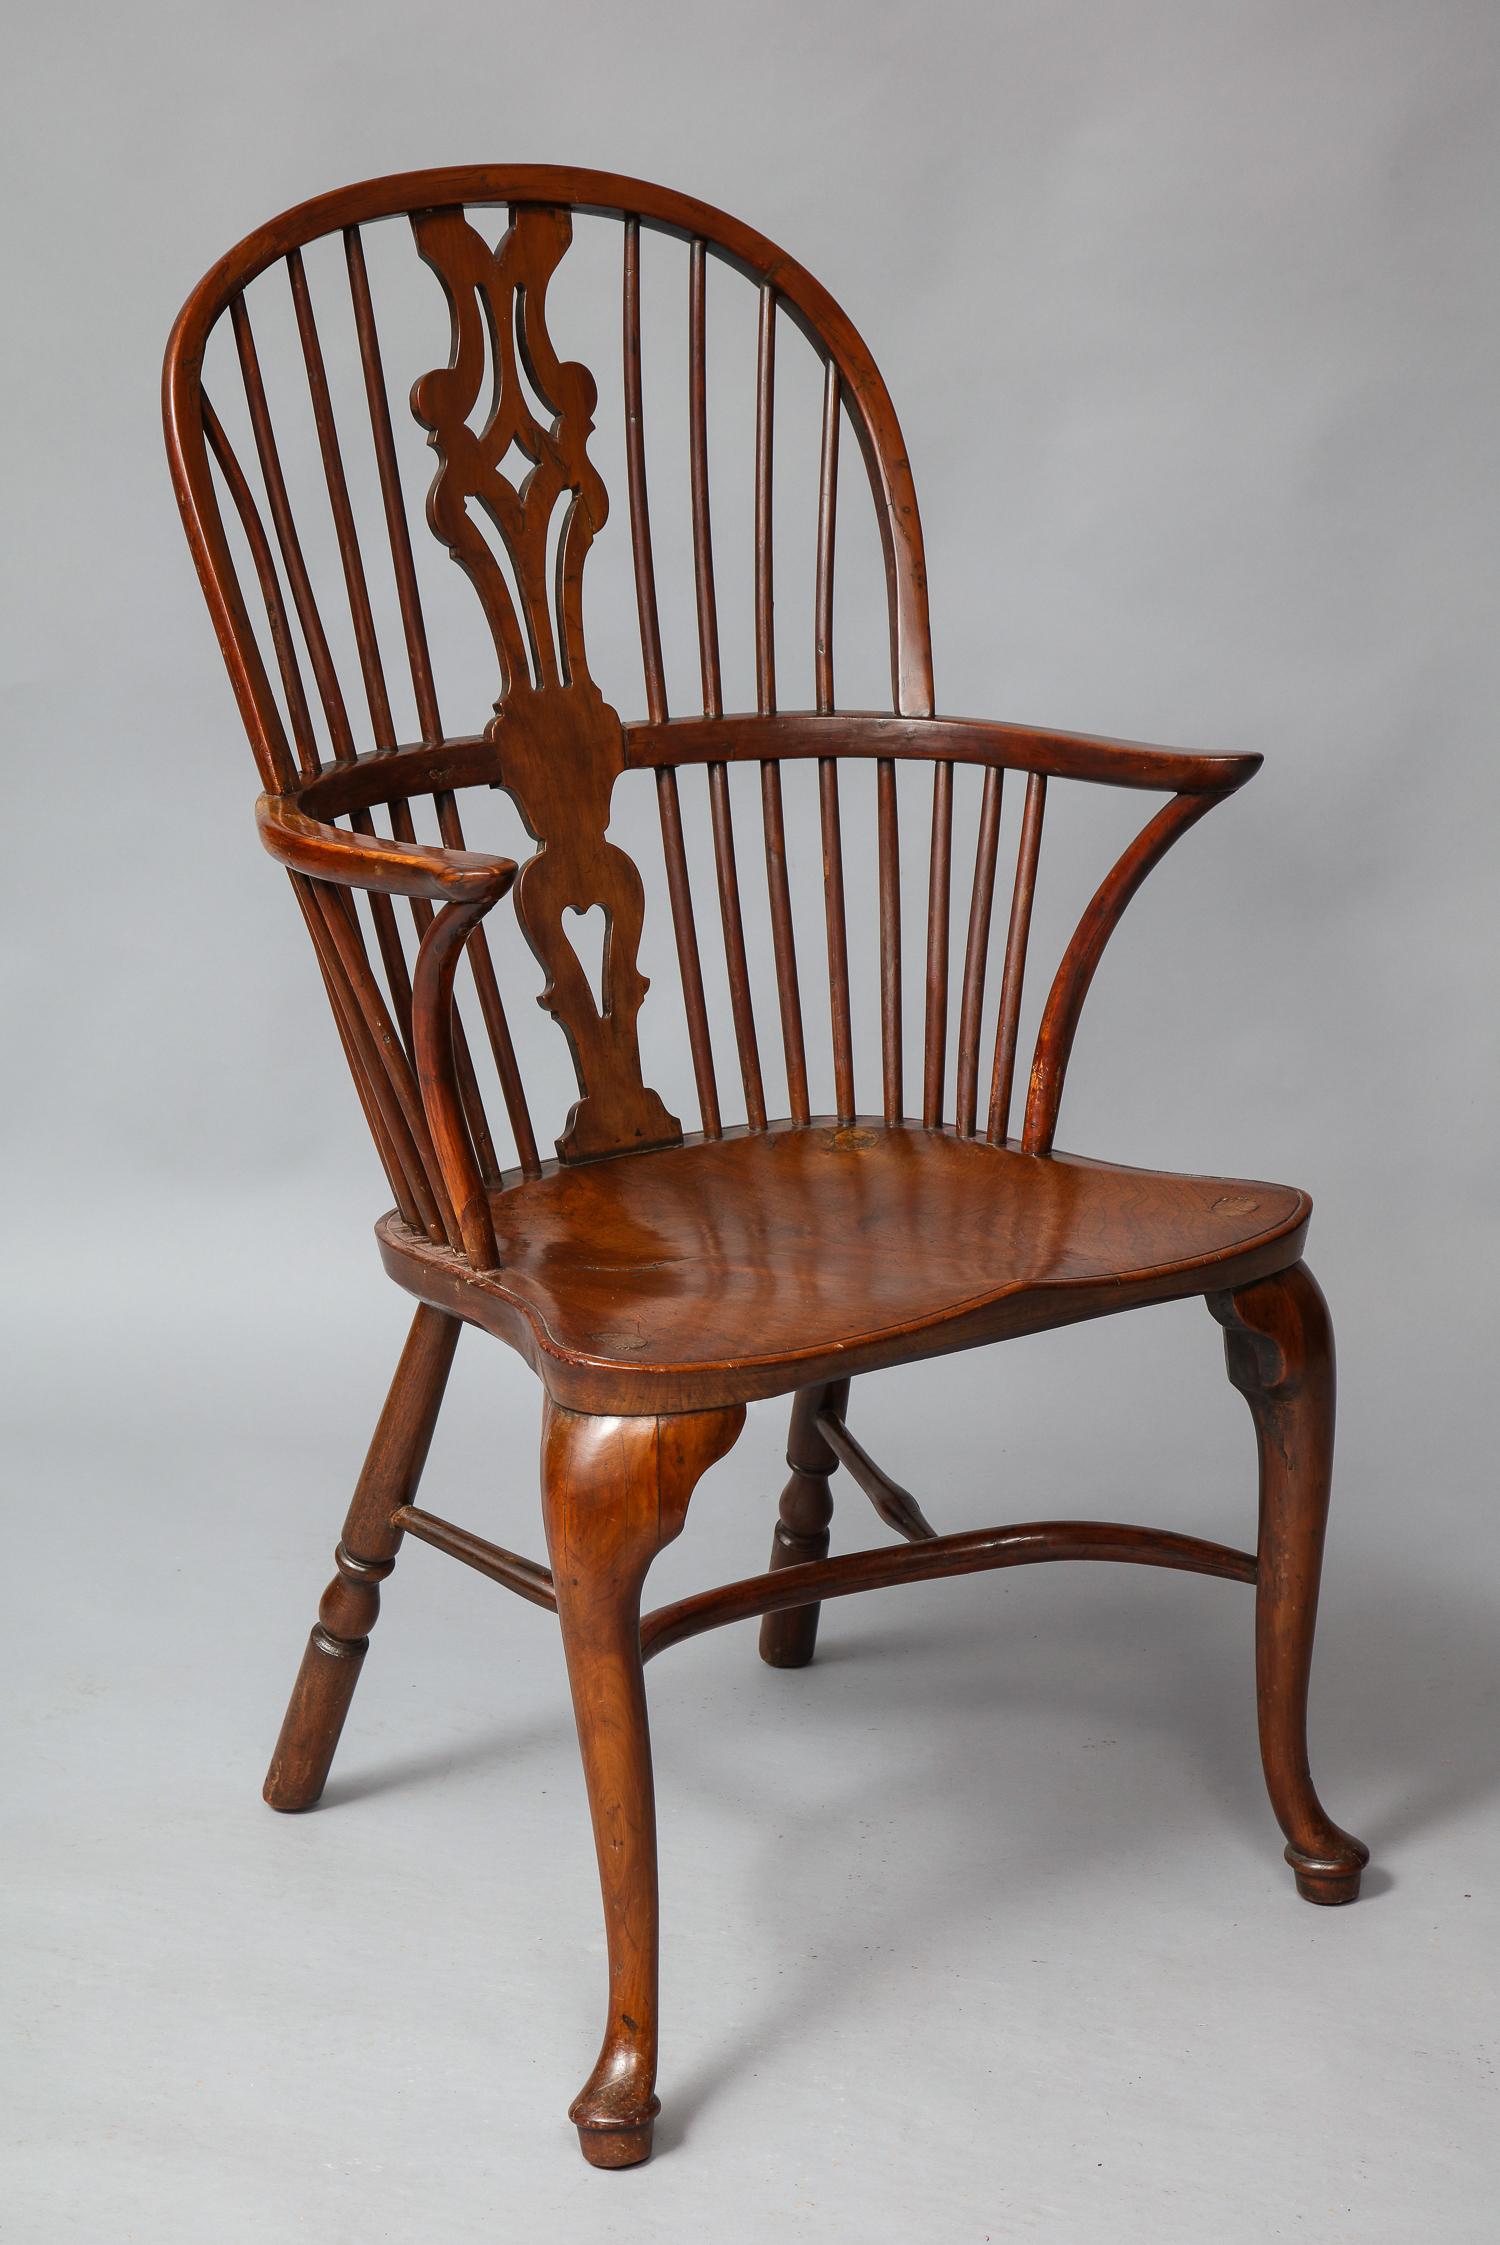 Very fine mid-18th century Thames Valley yew wood Windsor armchair, the hoop back with fret work splat, over crook supported continuous arm, the nicely saddled elm seat with vivid graining, standing on cabriole legs with padded feet, joined by